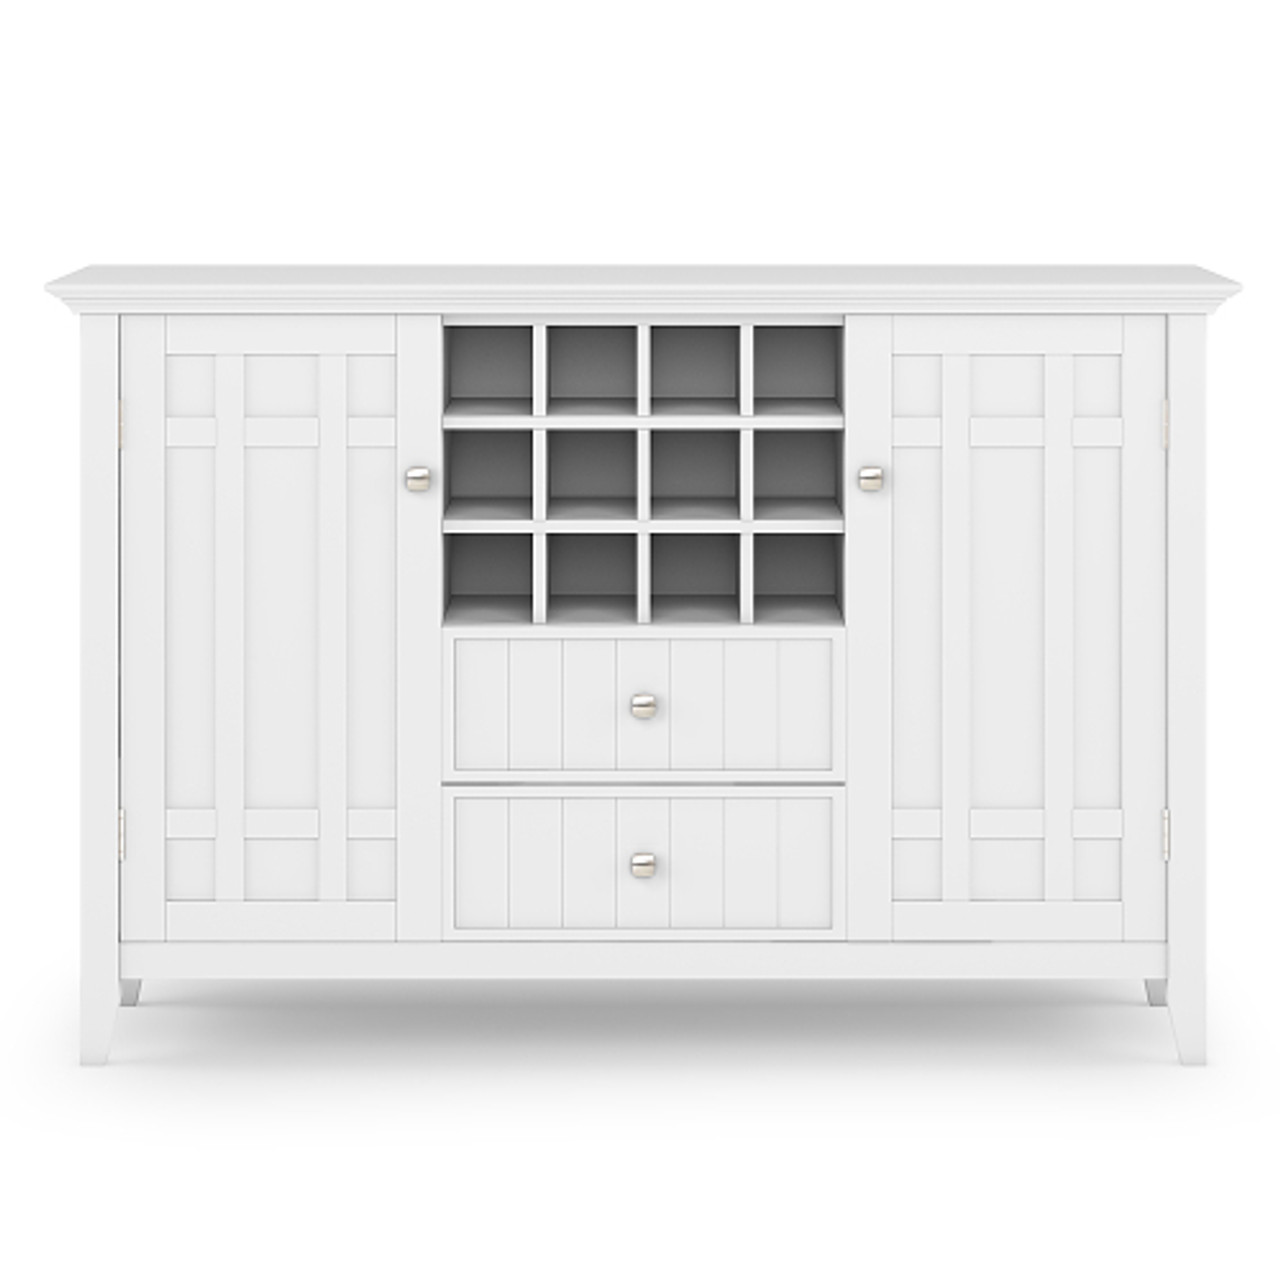 Simpli Home - Bedford Solid Wood 54 inch Wide Rustic Sideboard Buffet and Wine Rack - White